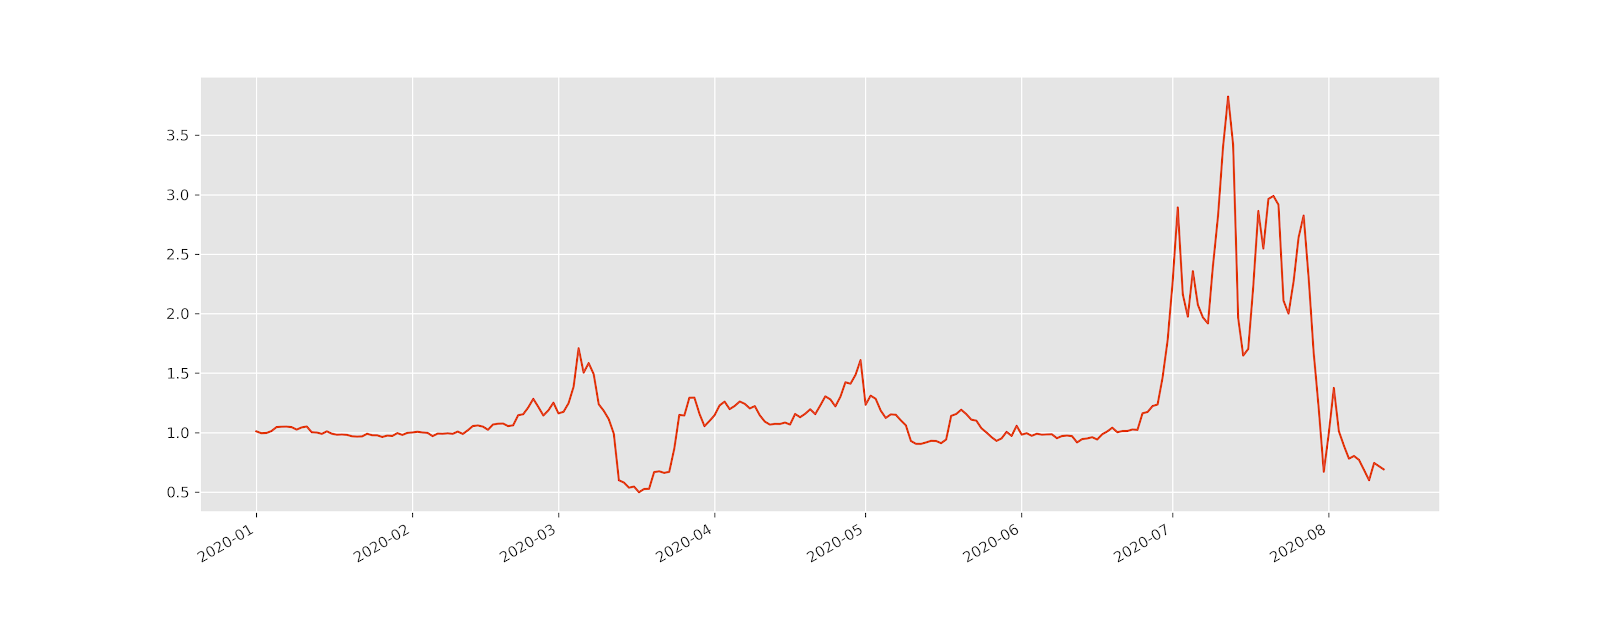 AMPL/USD Ampleforth price chart on CoinGecko for comparison to YAM